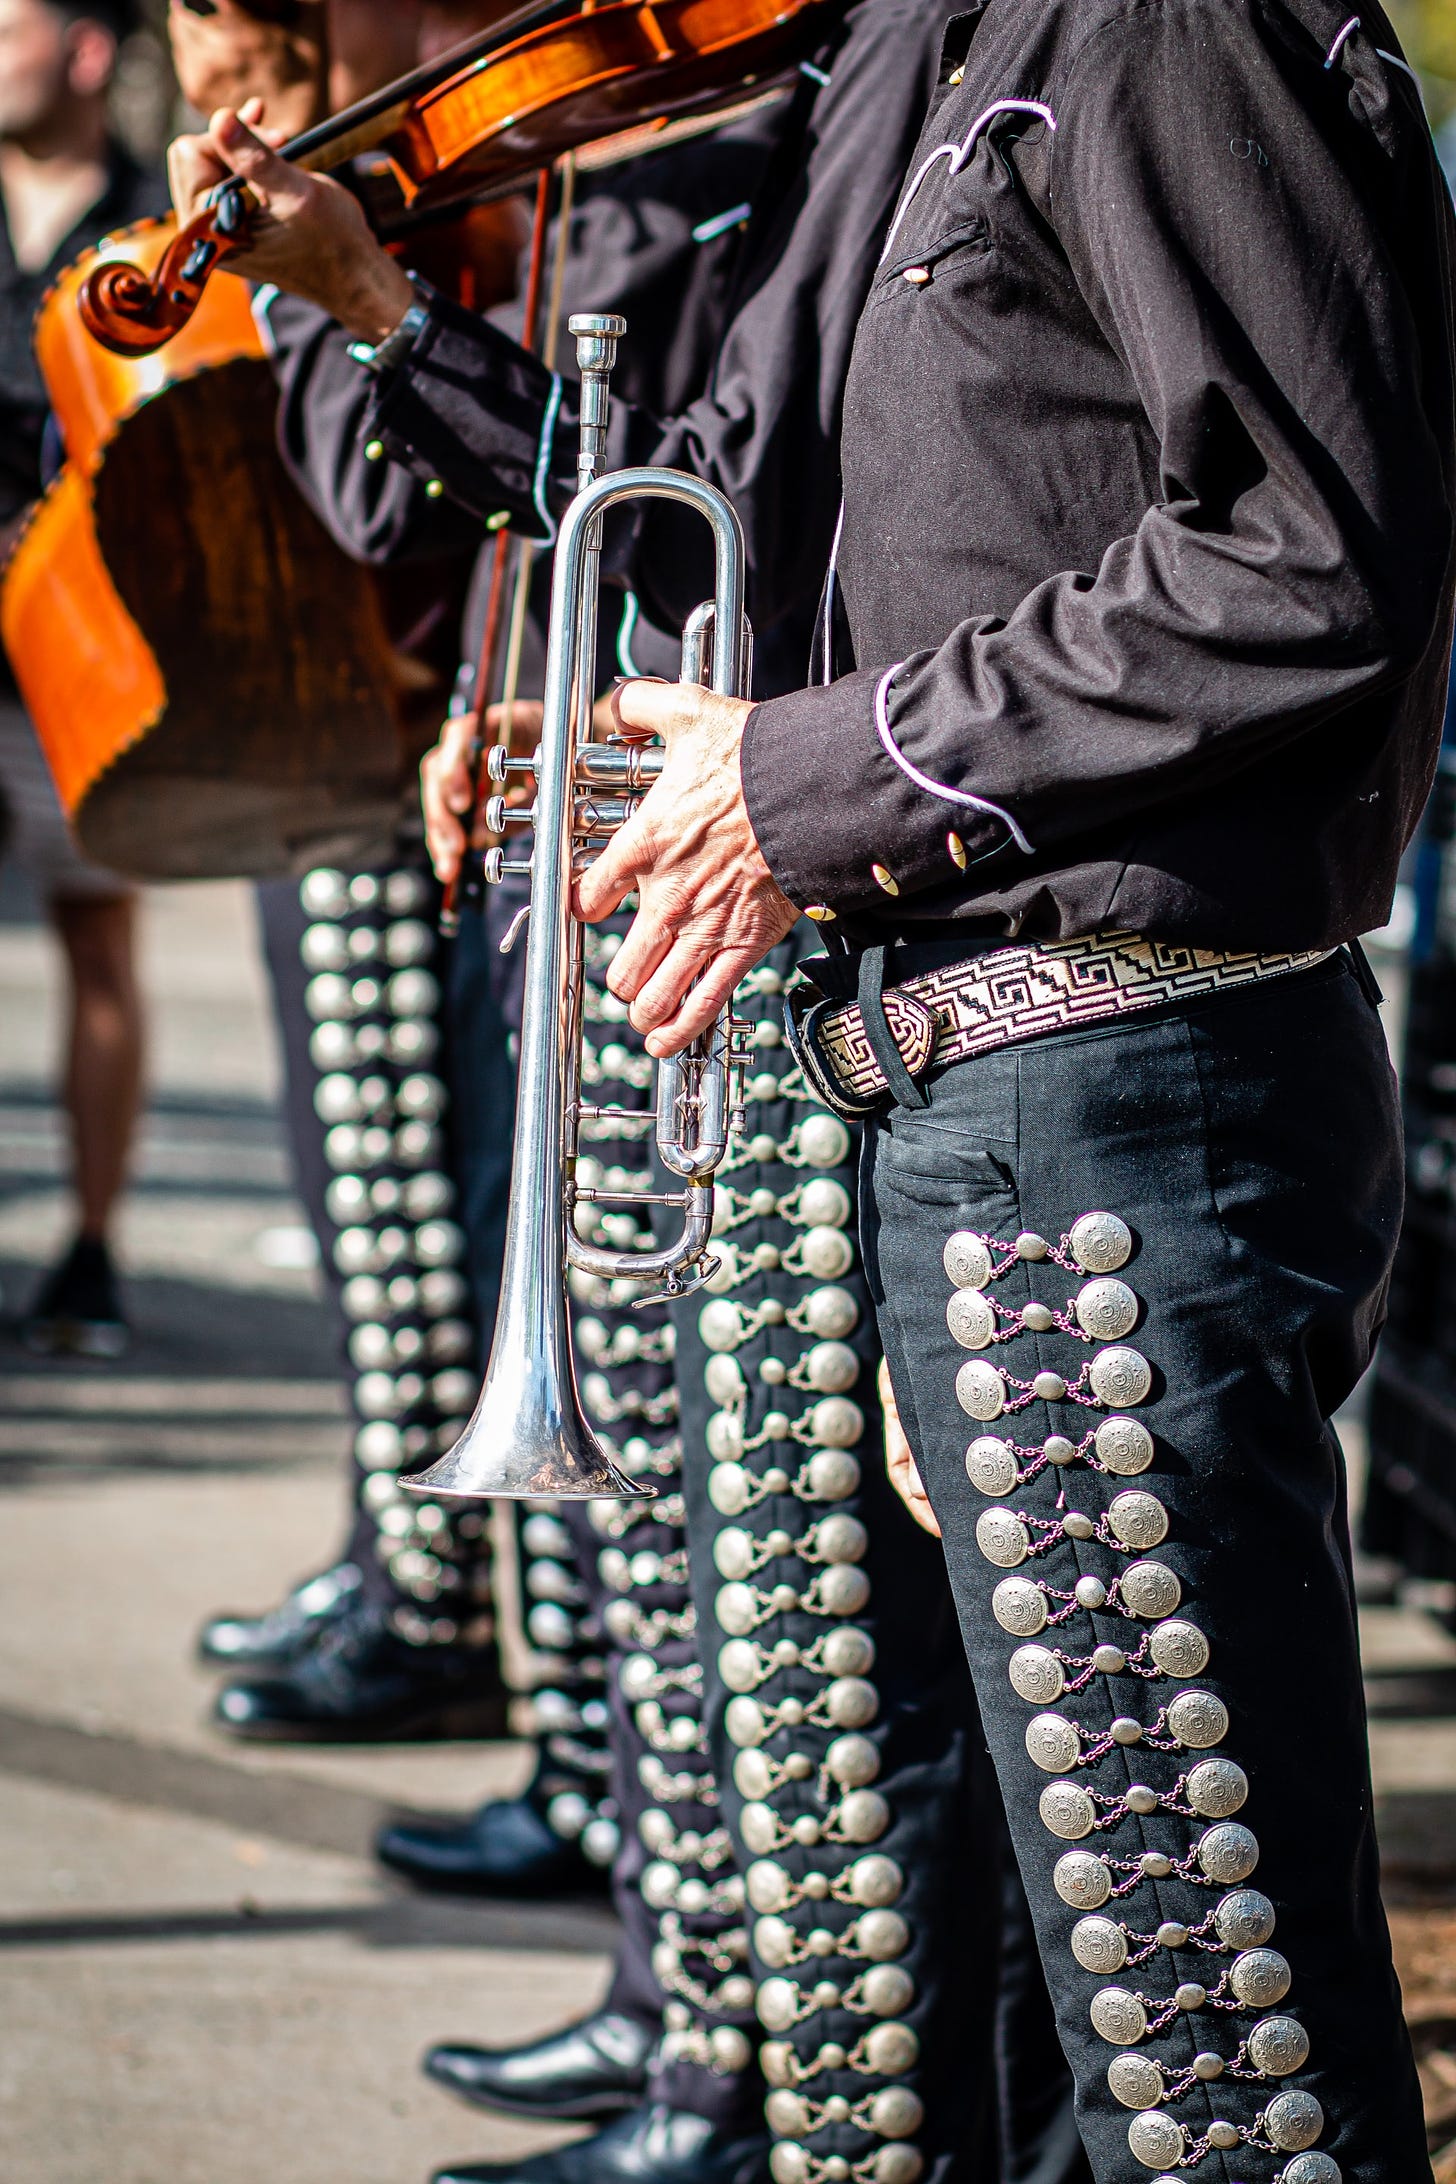 Side view of Mariachi musicians featuring silver buttons up the outer seams of the trouser legs